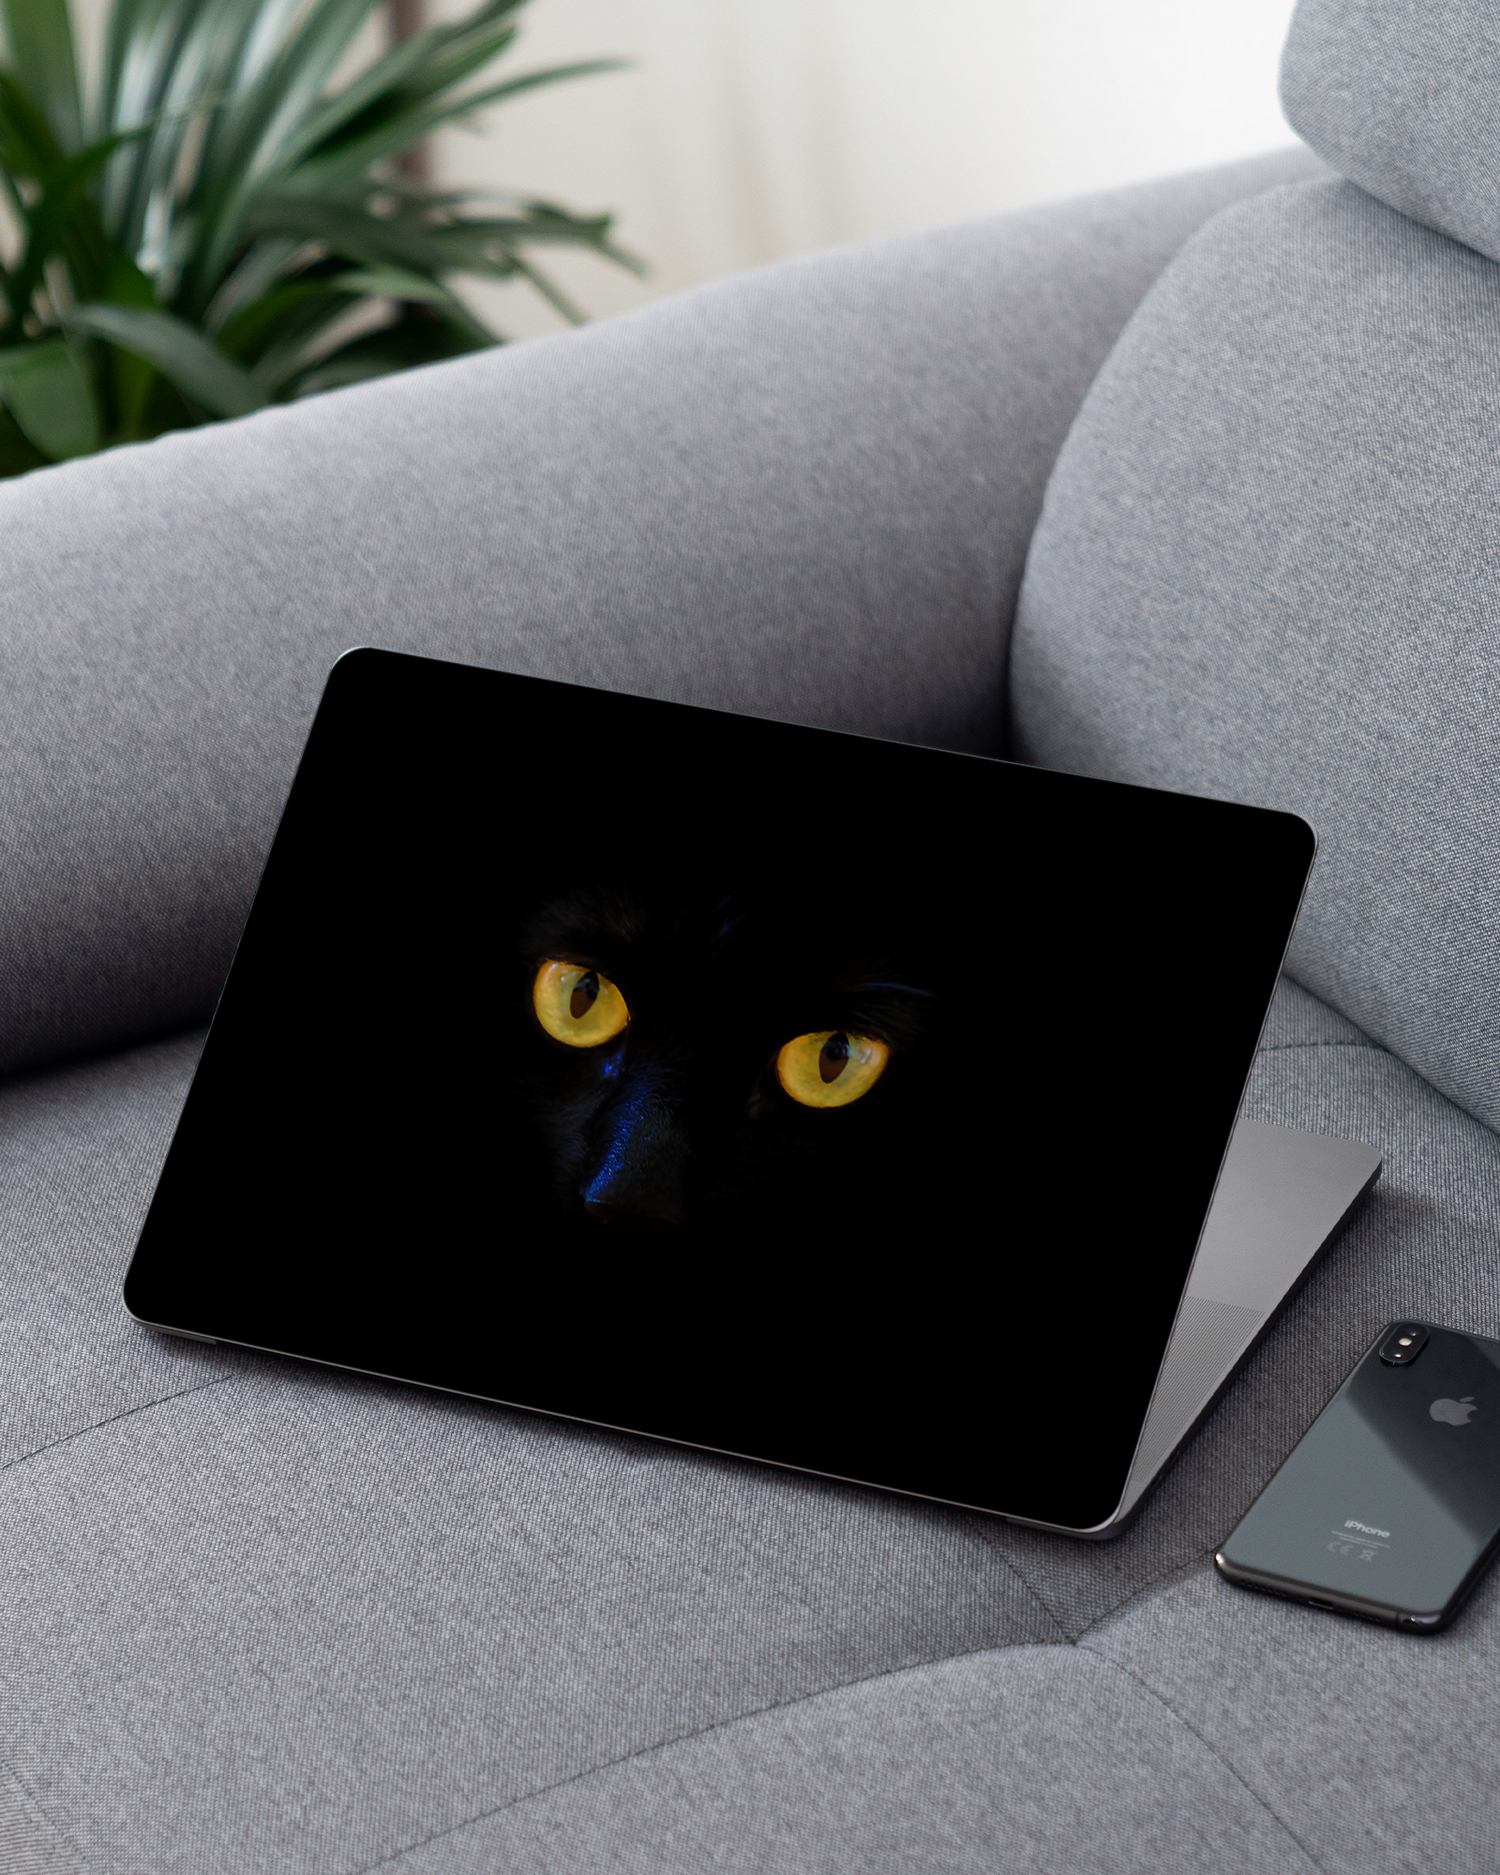 Black Cat Laptop Skin for 13 inch Apple MacBooks on a couch